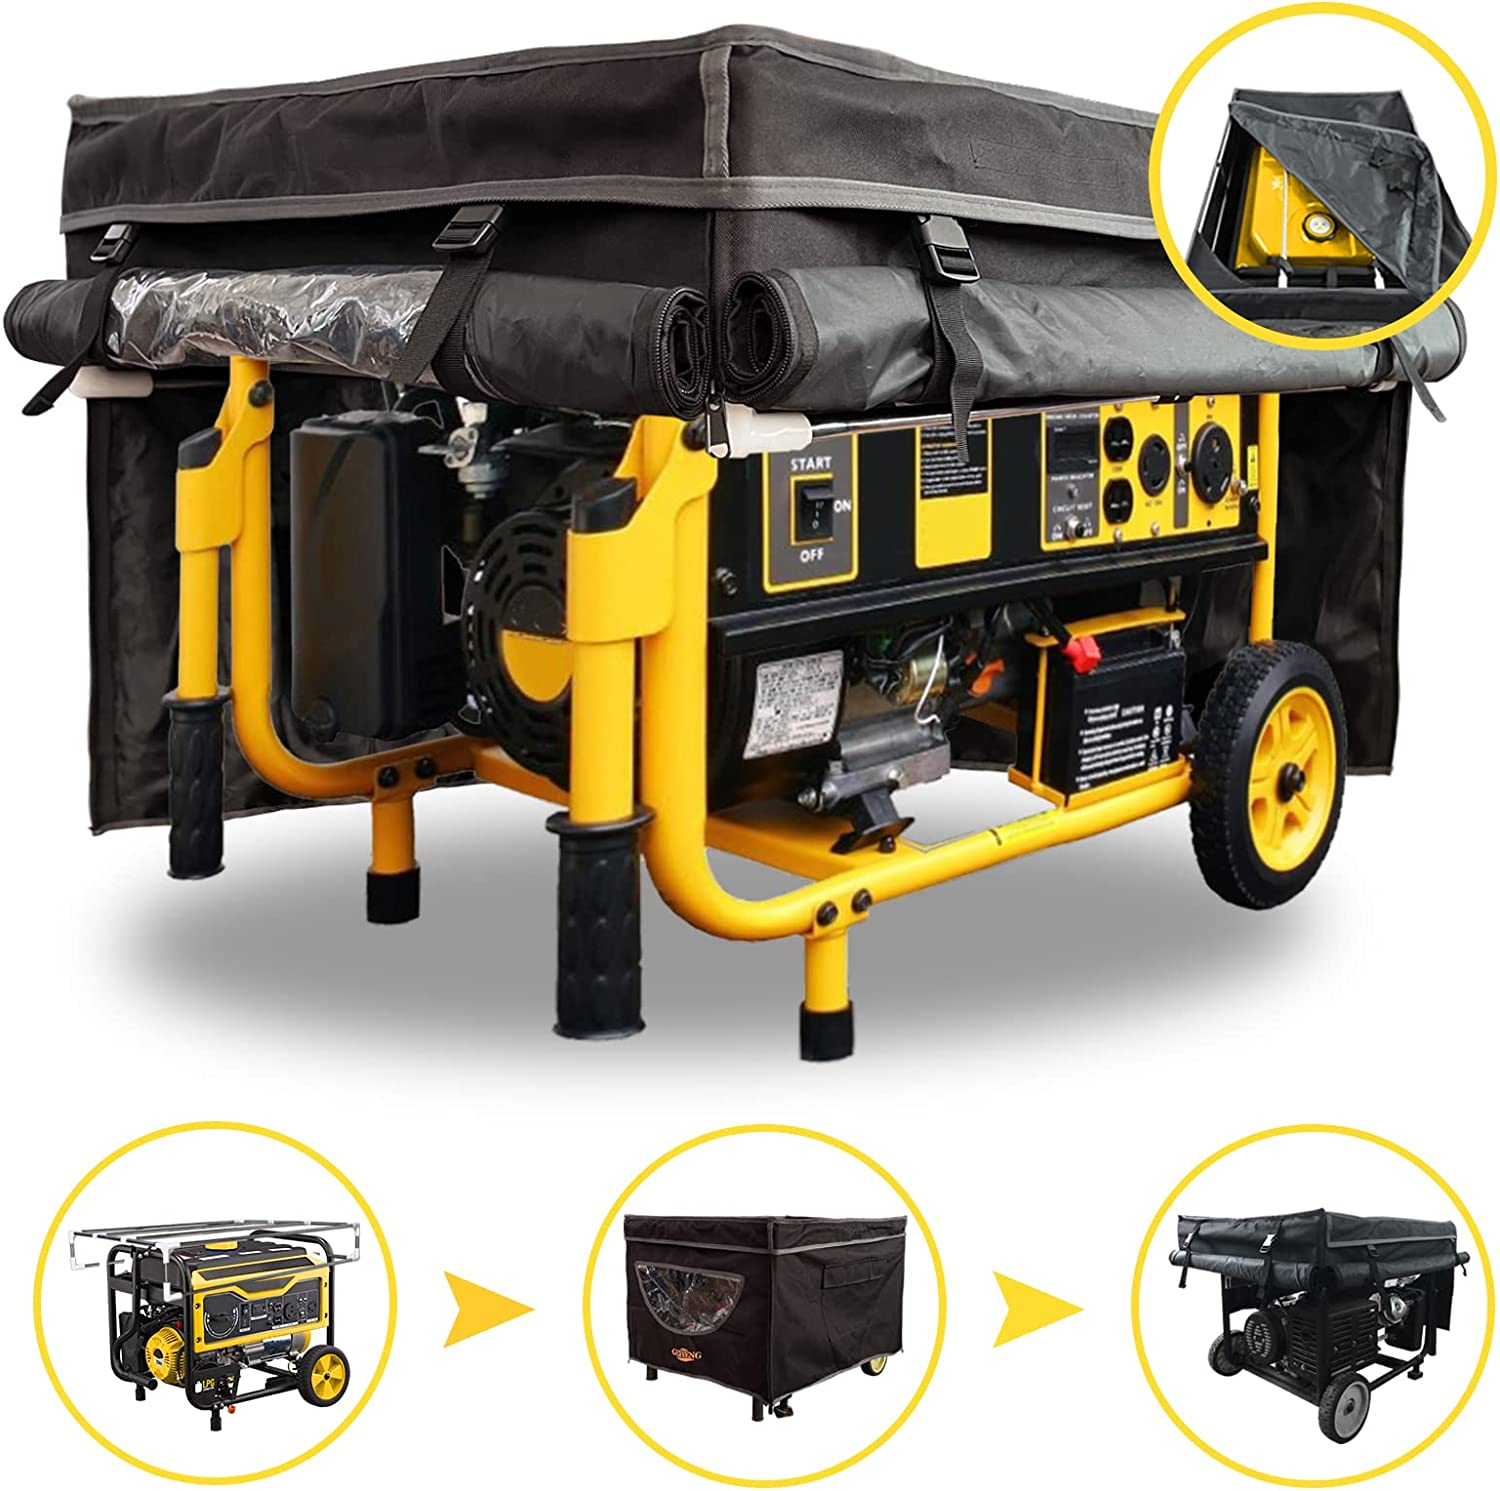 GEHENG generator running cover, with bracket, 600D Oxford polyester fabric, 100% waterproof and sunscreen, protect your investment, suitable for 3500W-10000W frame type generators.for Westinghouse, Champion, DuroMax, Generac and More, Black.